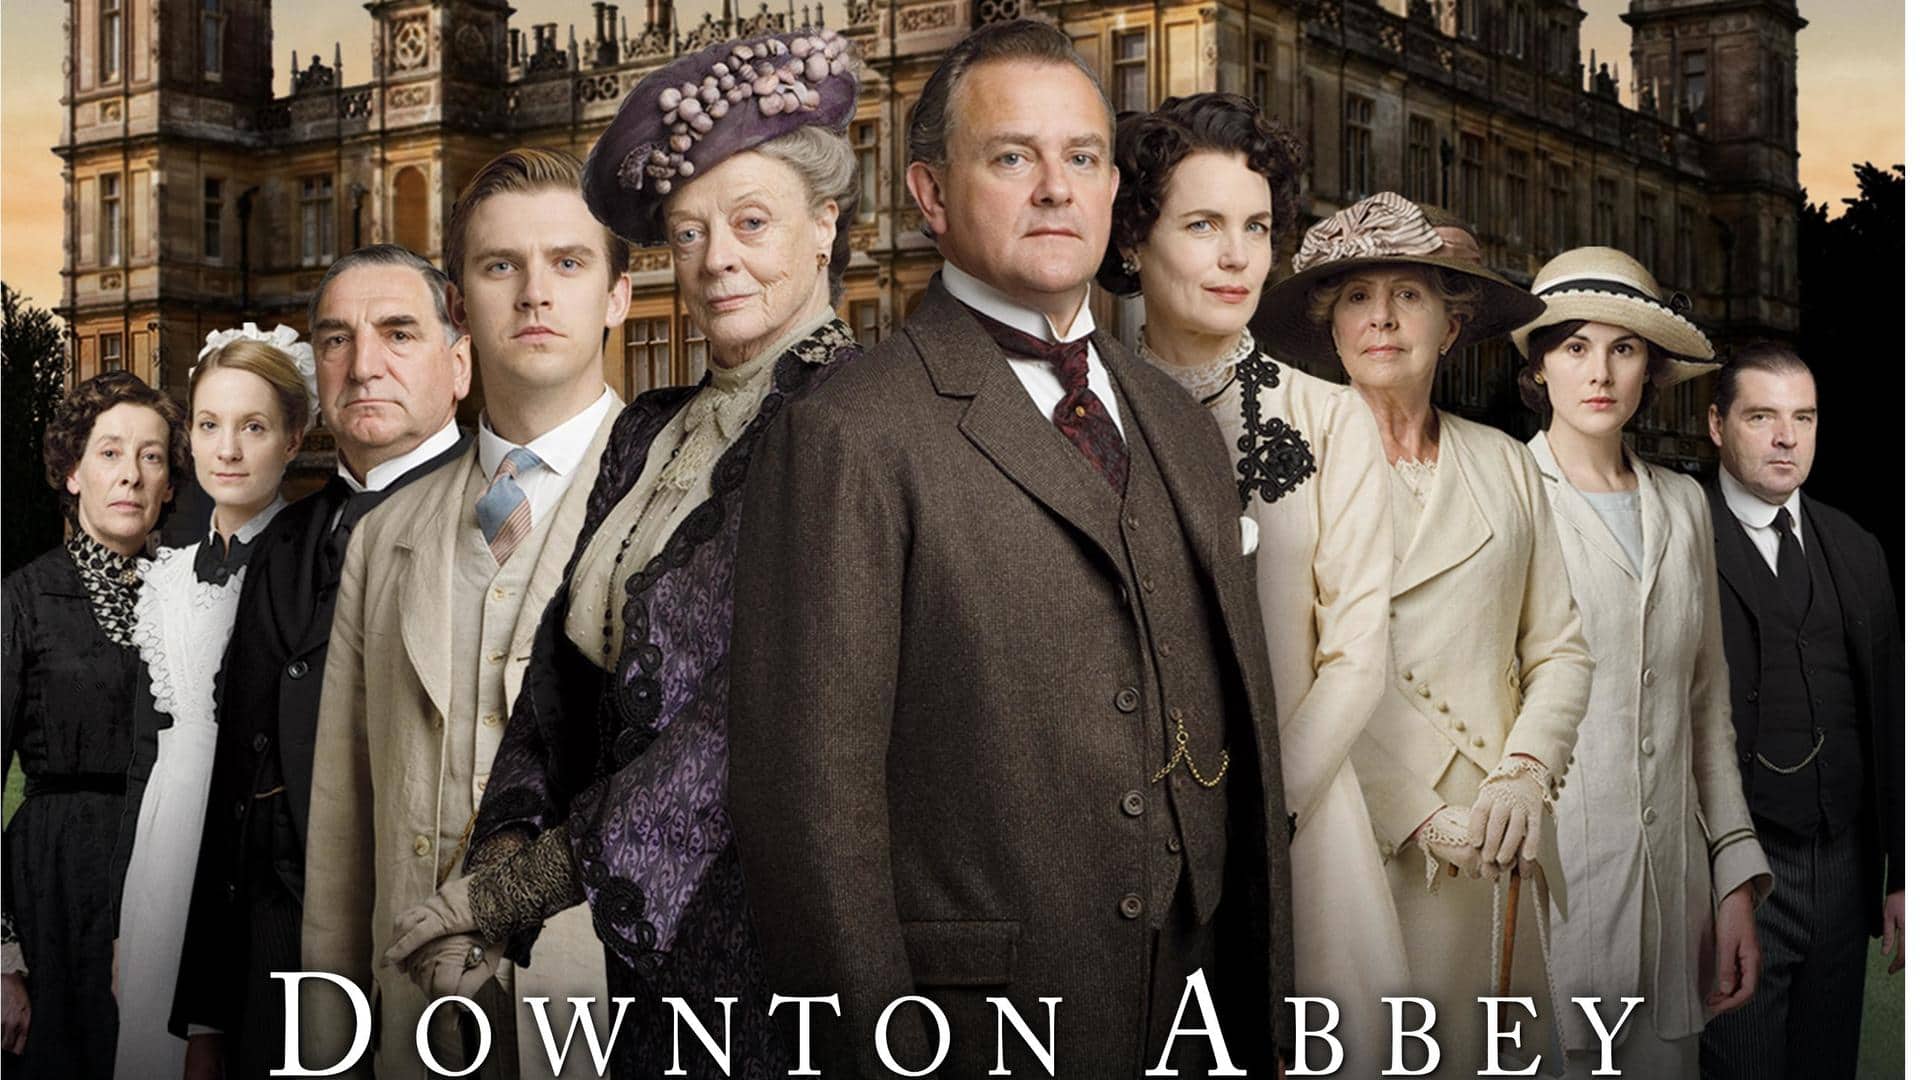 'Downton Abbey' to make a grand comeback after 8 years